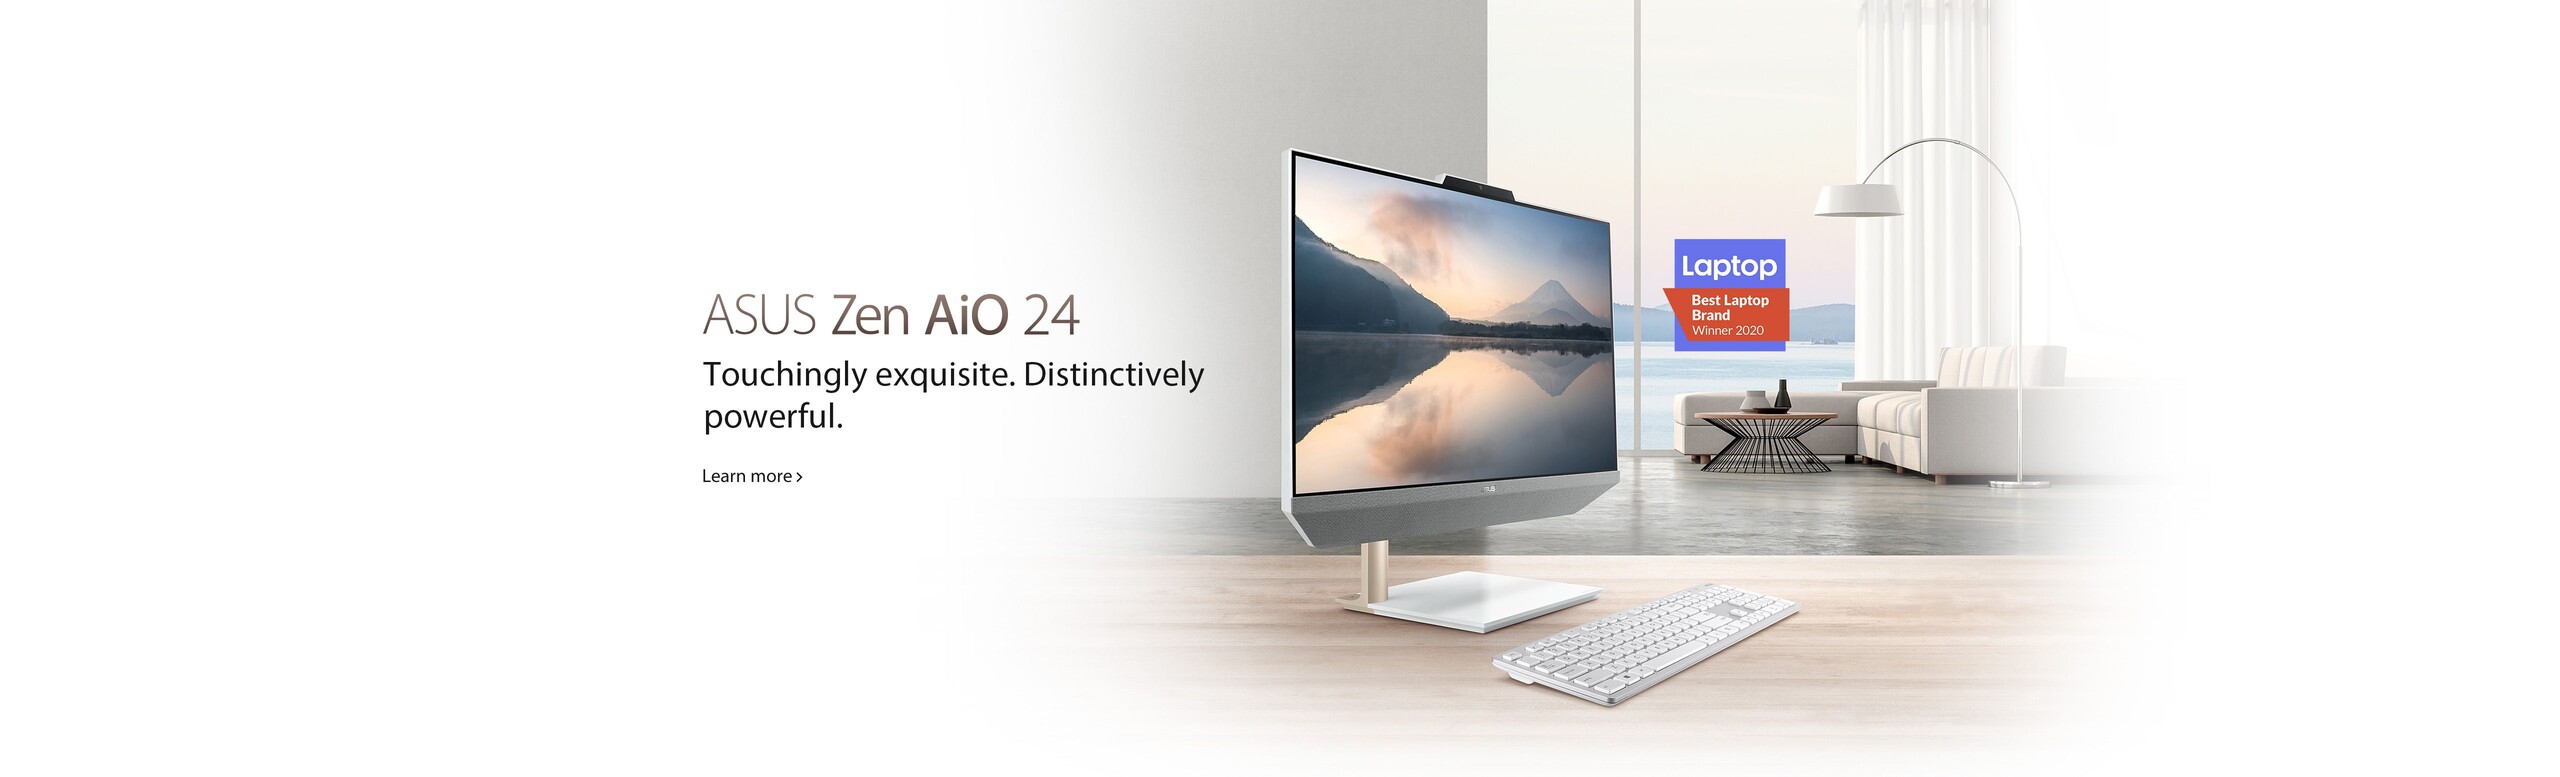 Image of Zen AiO 24 M5401 with couch and coffee table with floor lamp in the background.  Best Laptop Brand Winner 2020 logo.  ASUS Zen AiO 24  Touchingly exquisite.  Distinctively powerful.  Learn more >